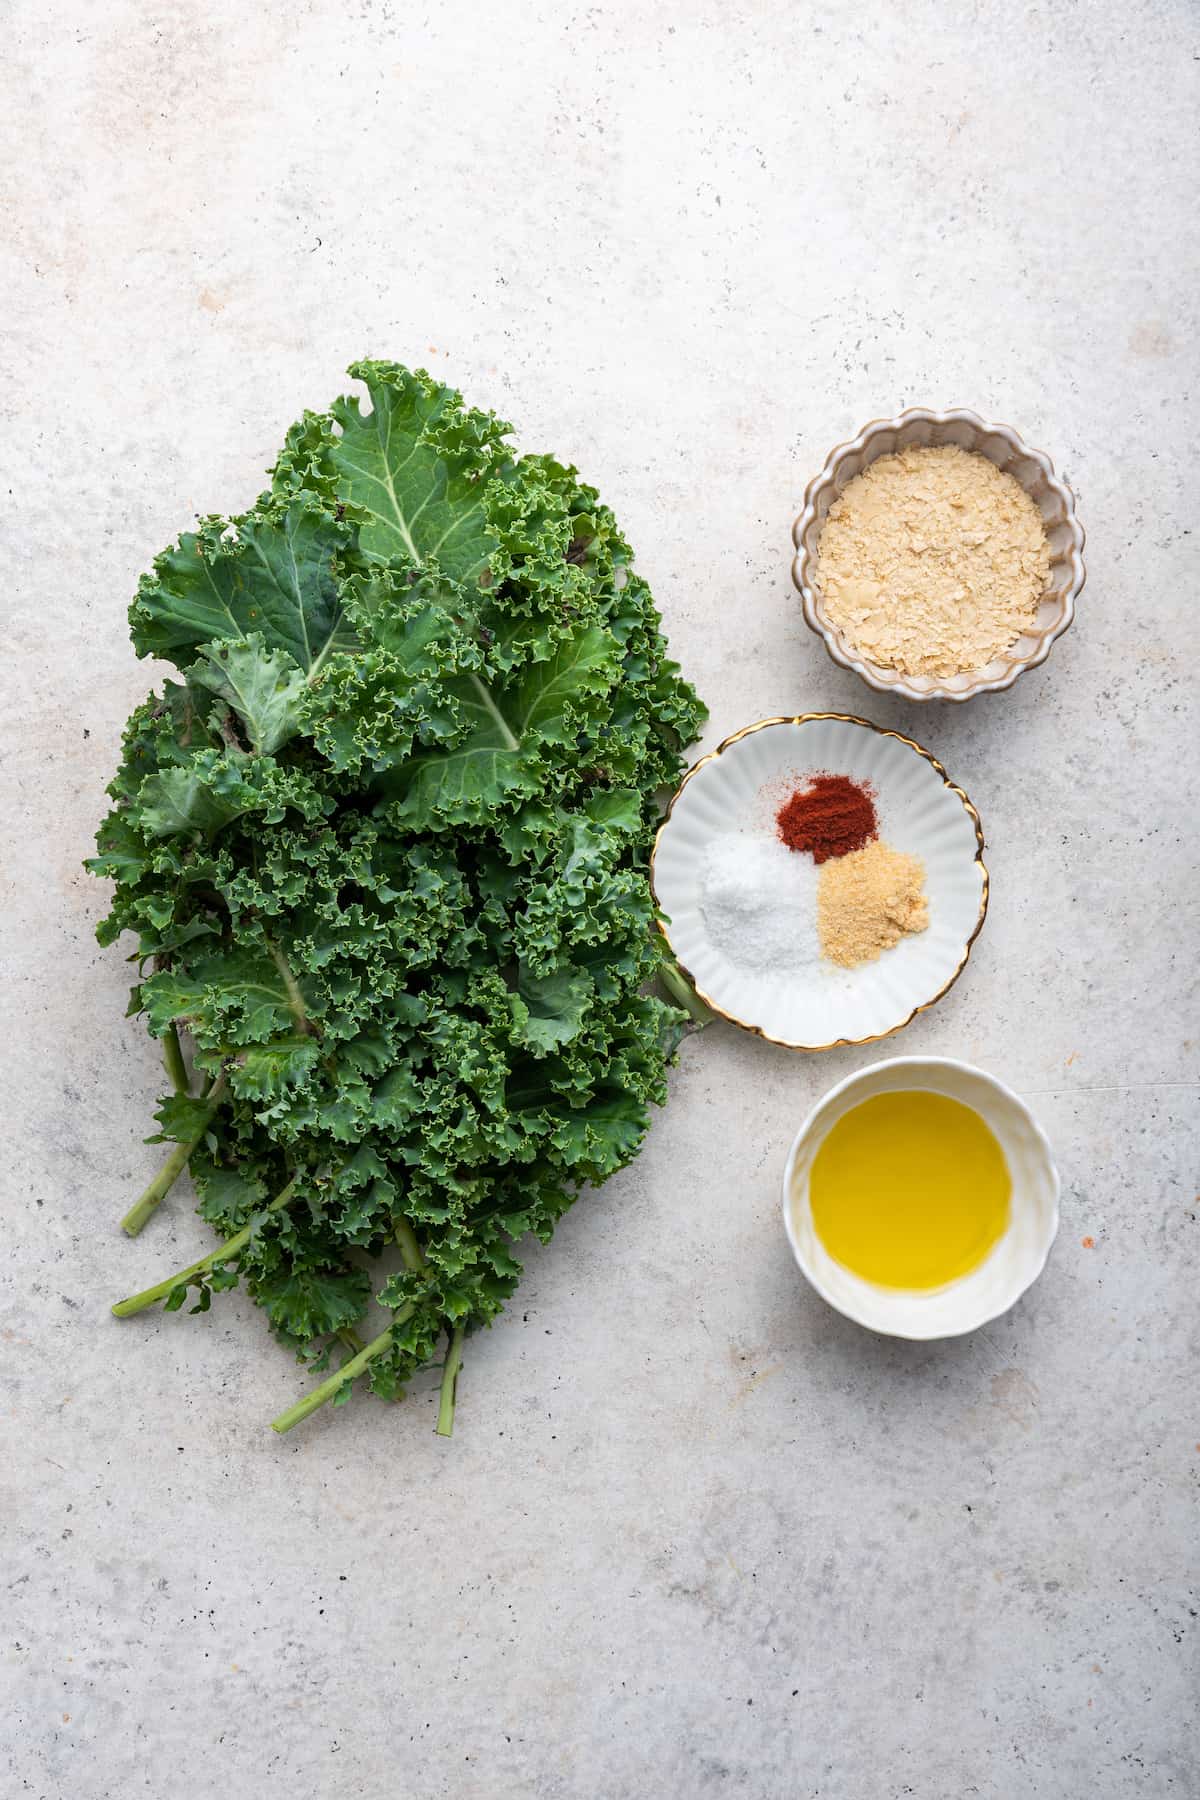 Overhead view of ingredients for kale chips